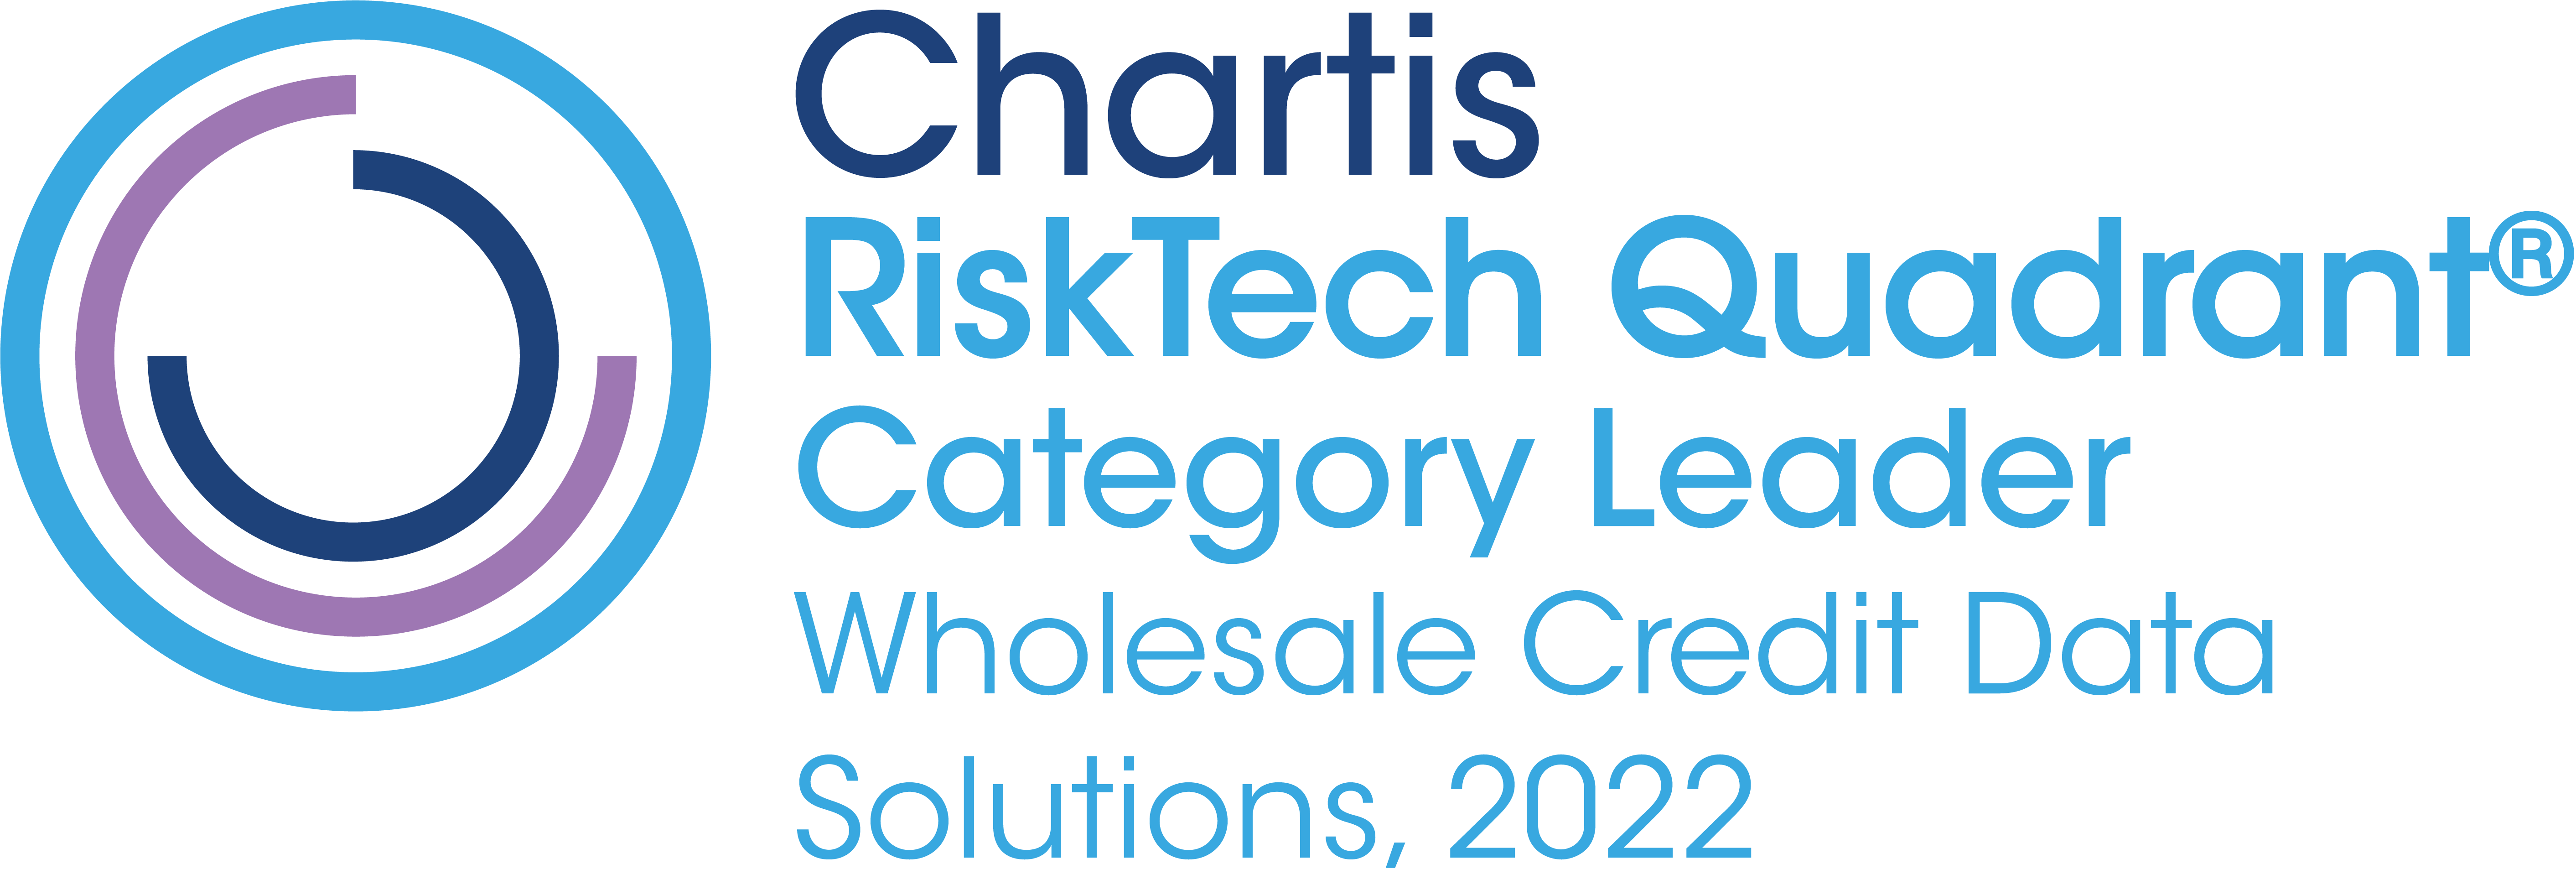 Moody's Analytics Pulse the Category Leader of Wholesale Credit Data Solutions for Chartis RiskTech Quadrant in 2022